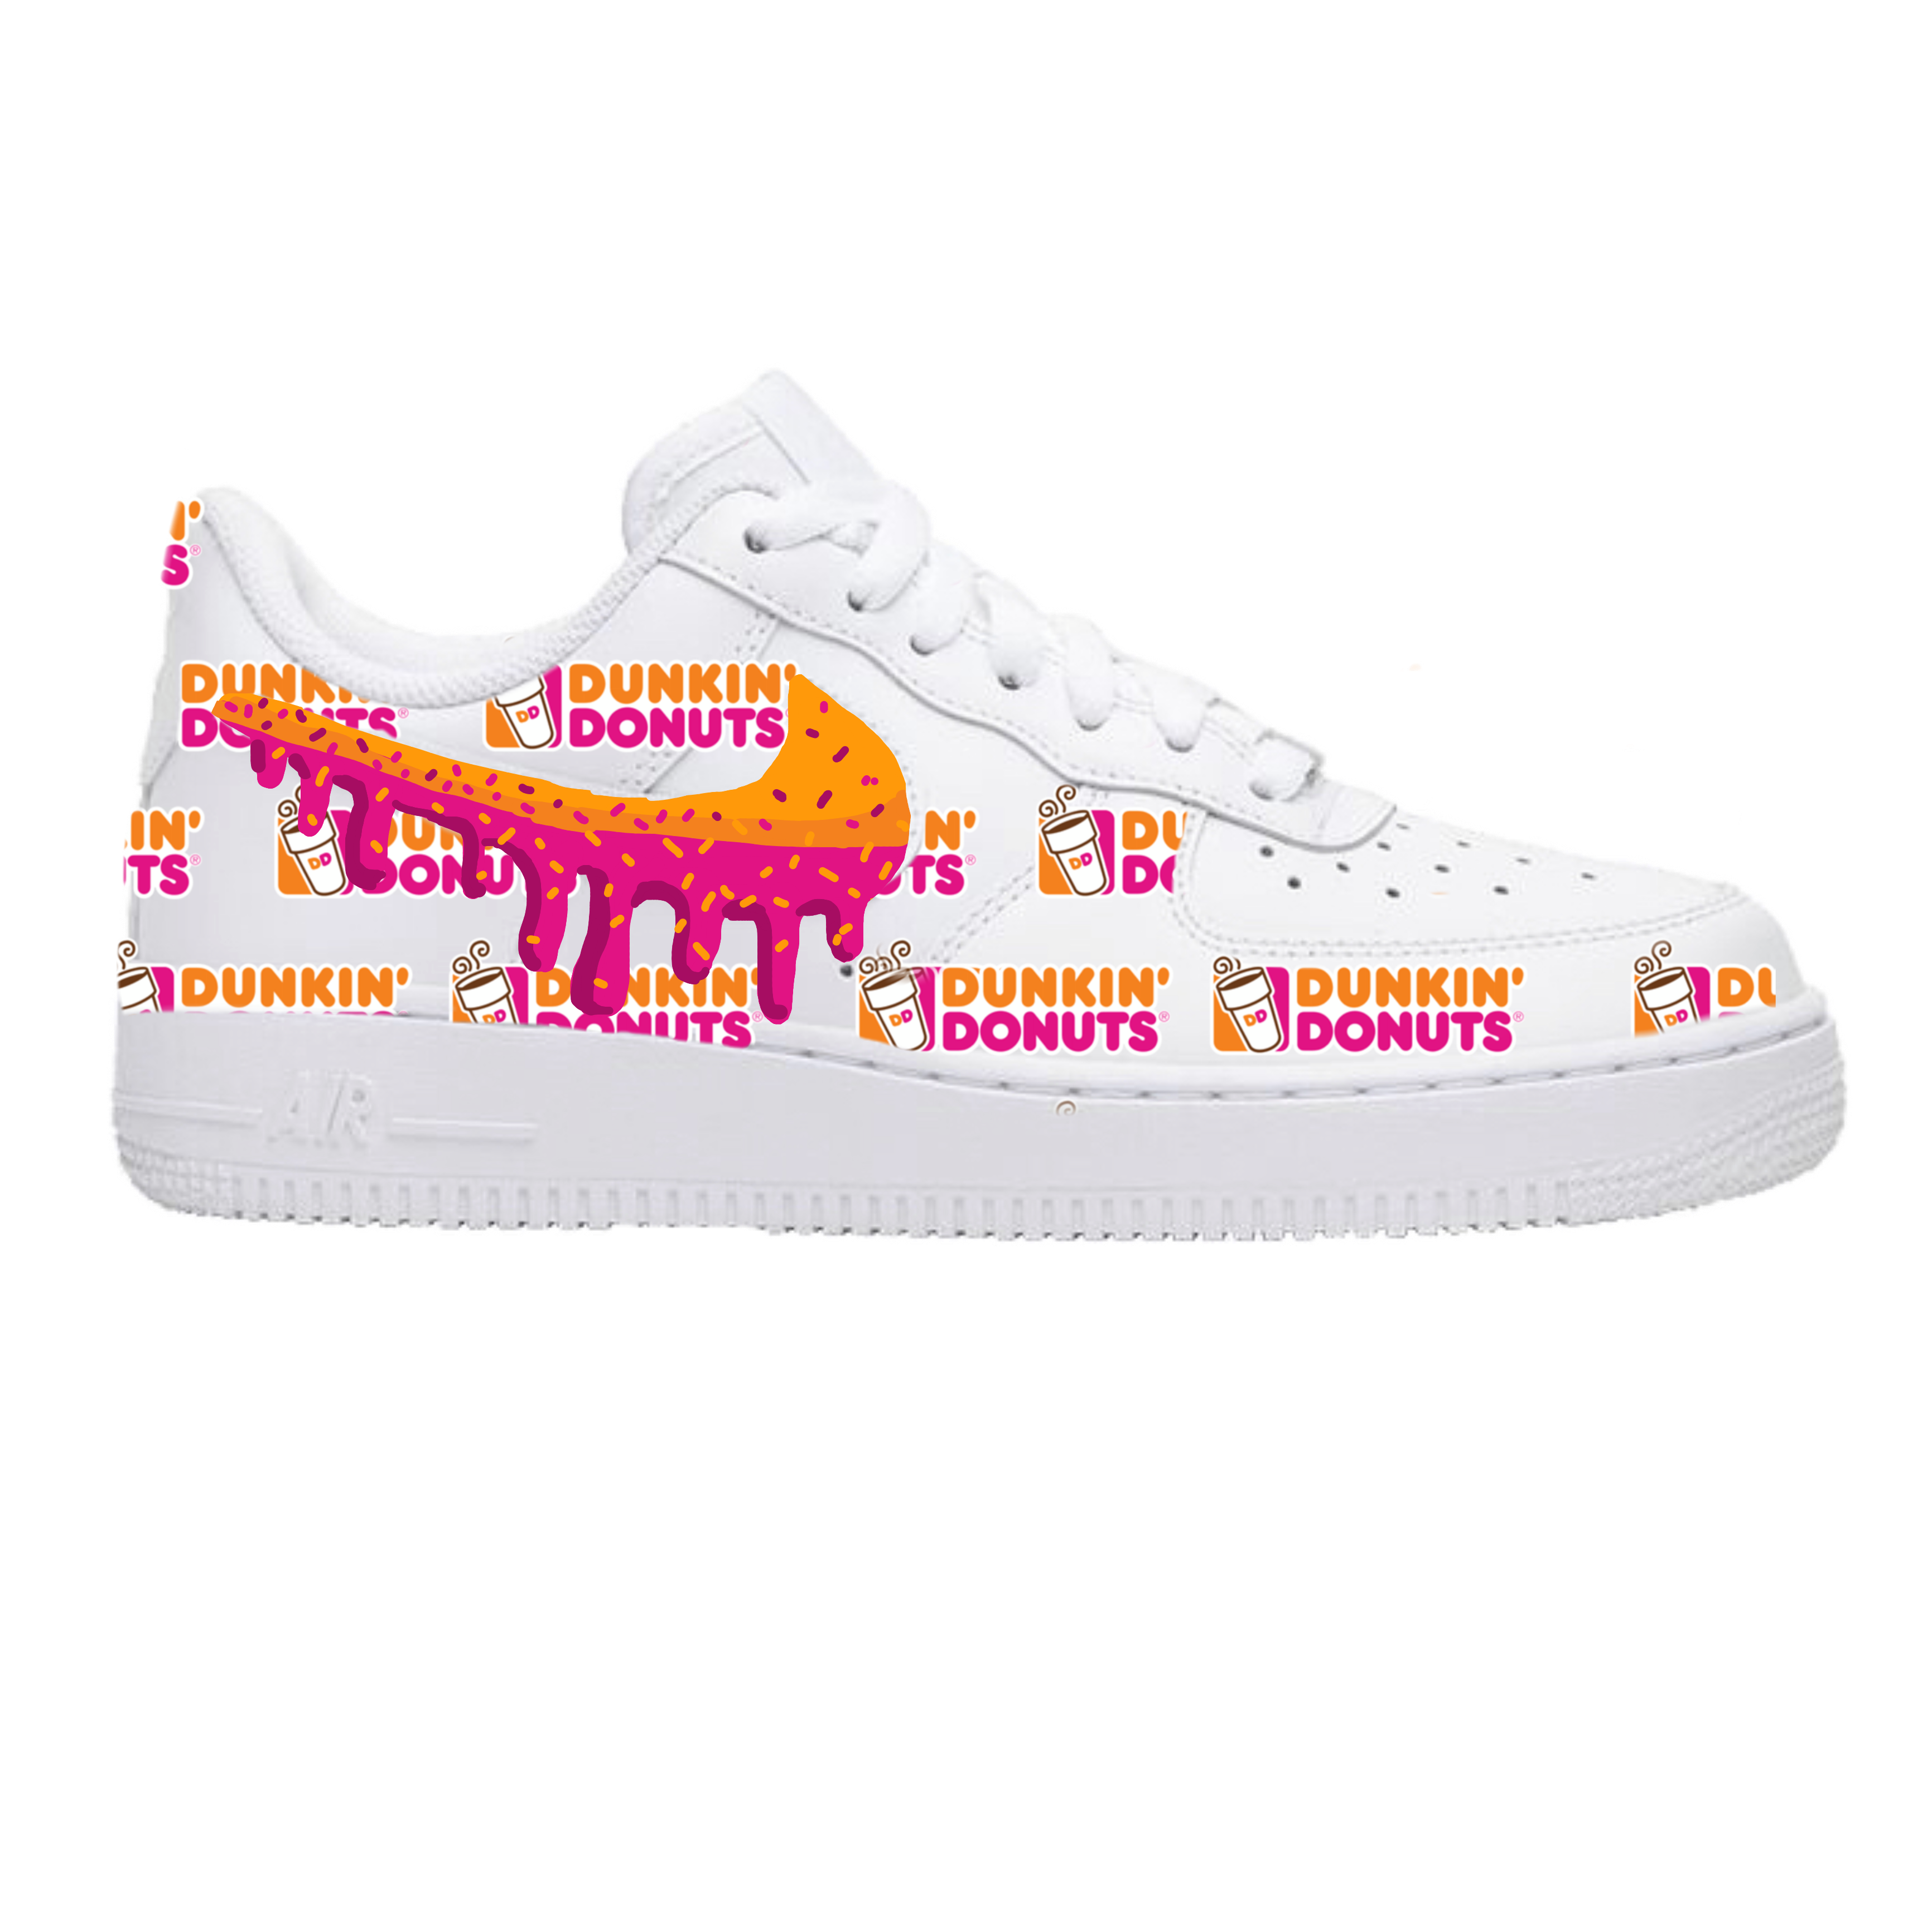 nike air force 1 dunkin donuts Online Shopping mall | Find the ...